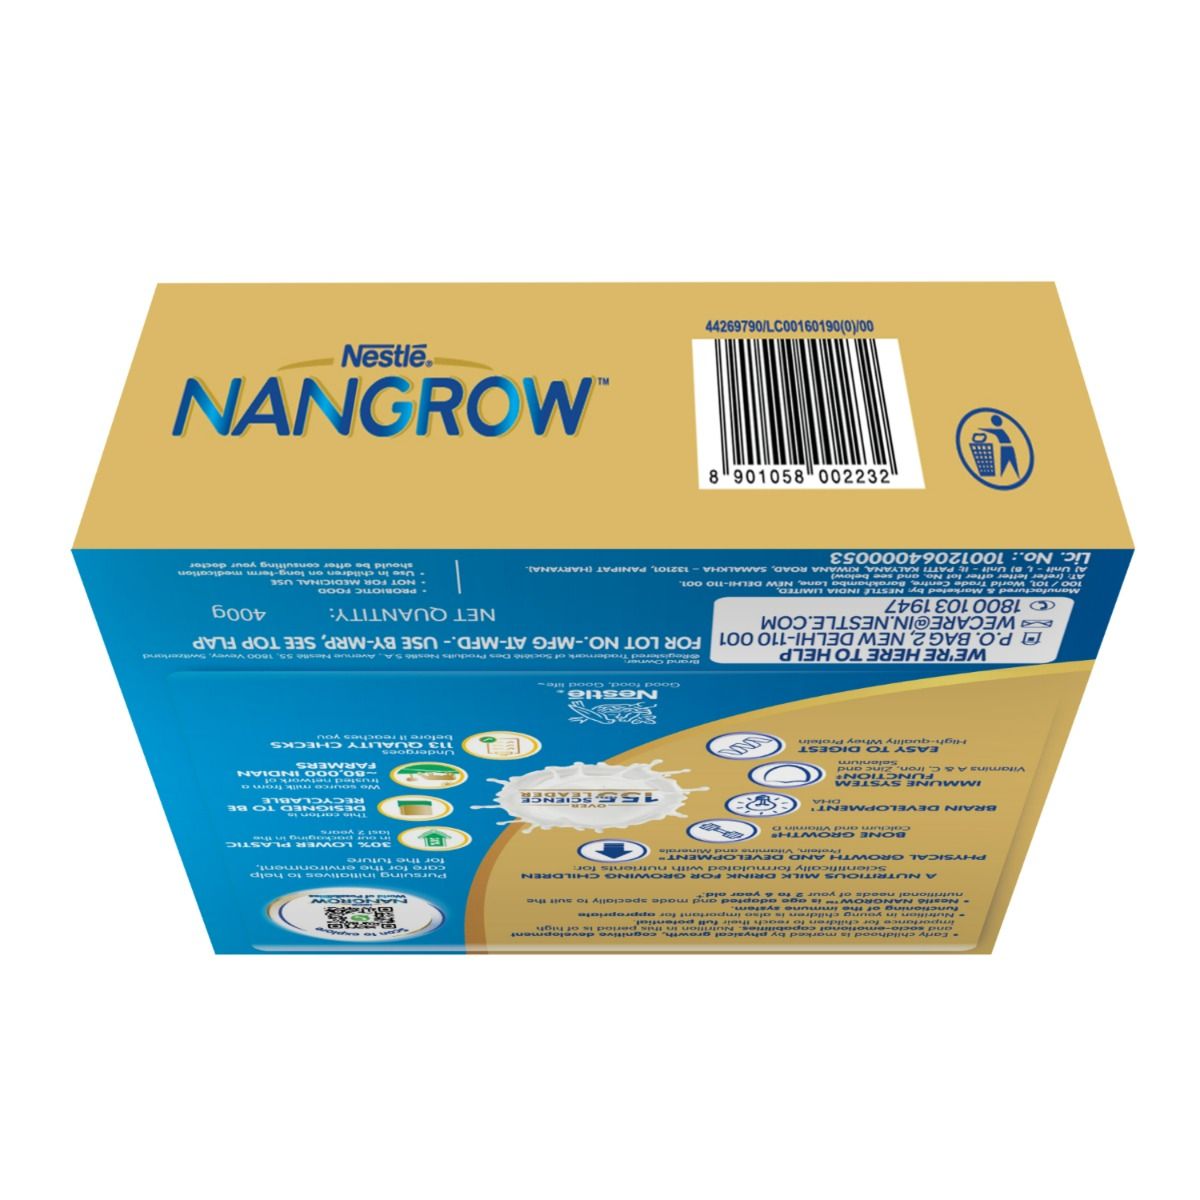 Nestle Nangrow Creamy Vanilla Flavour Nutrition Drink Powder, 400 gm Refill Pack, Pack of 1 